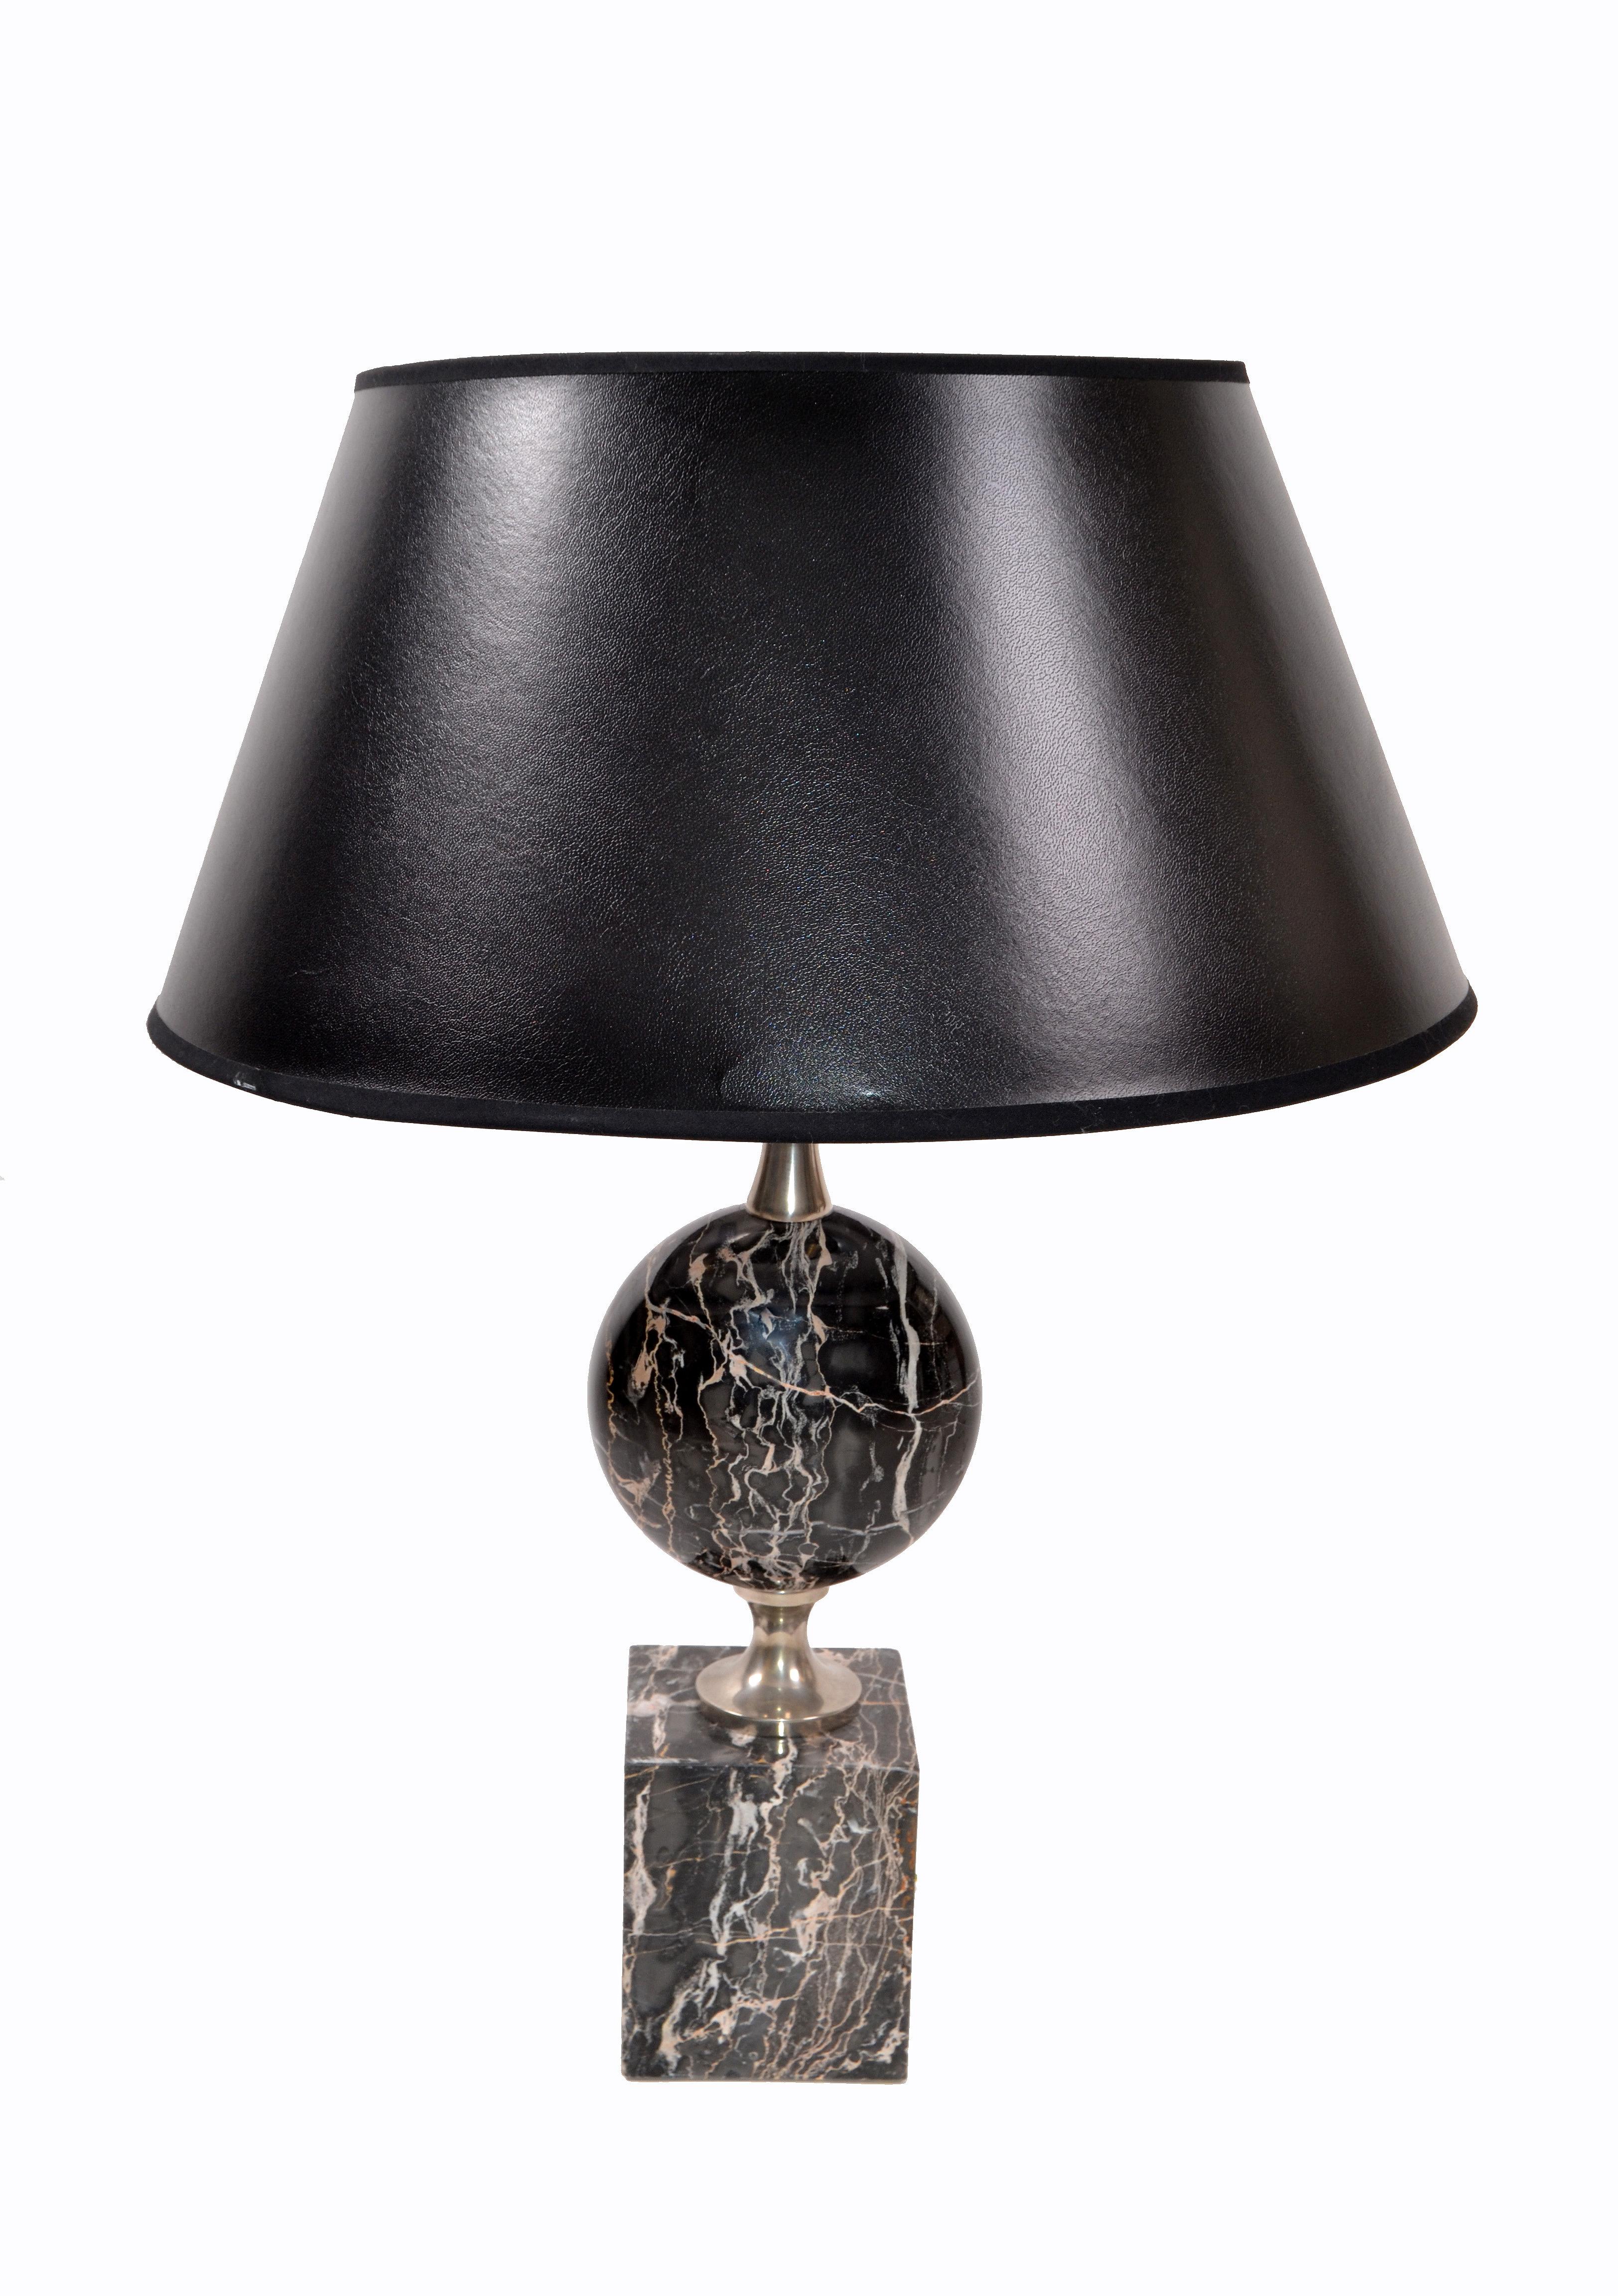 Maison Barbier French Marble and Chrome Table Lamp, 1960 For Sale 2